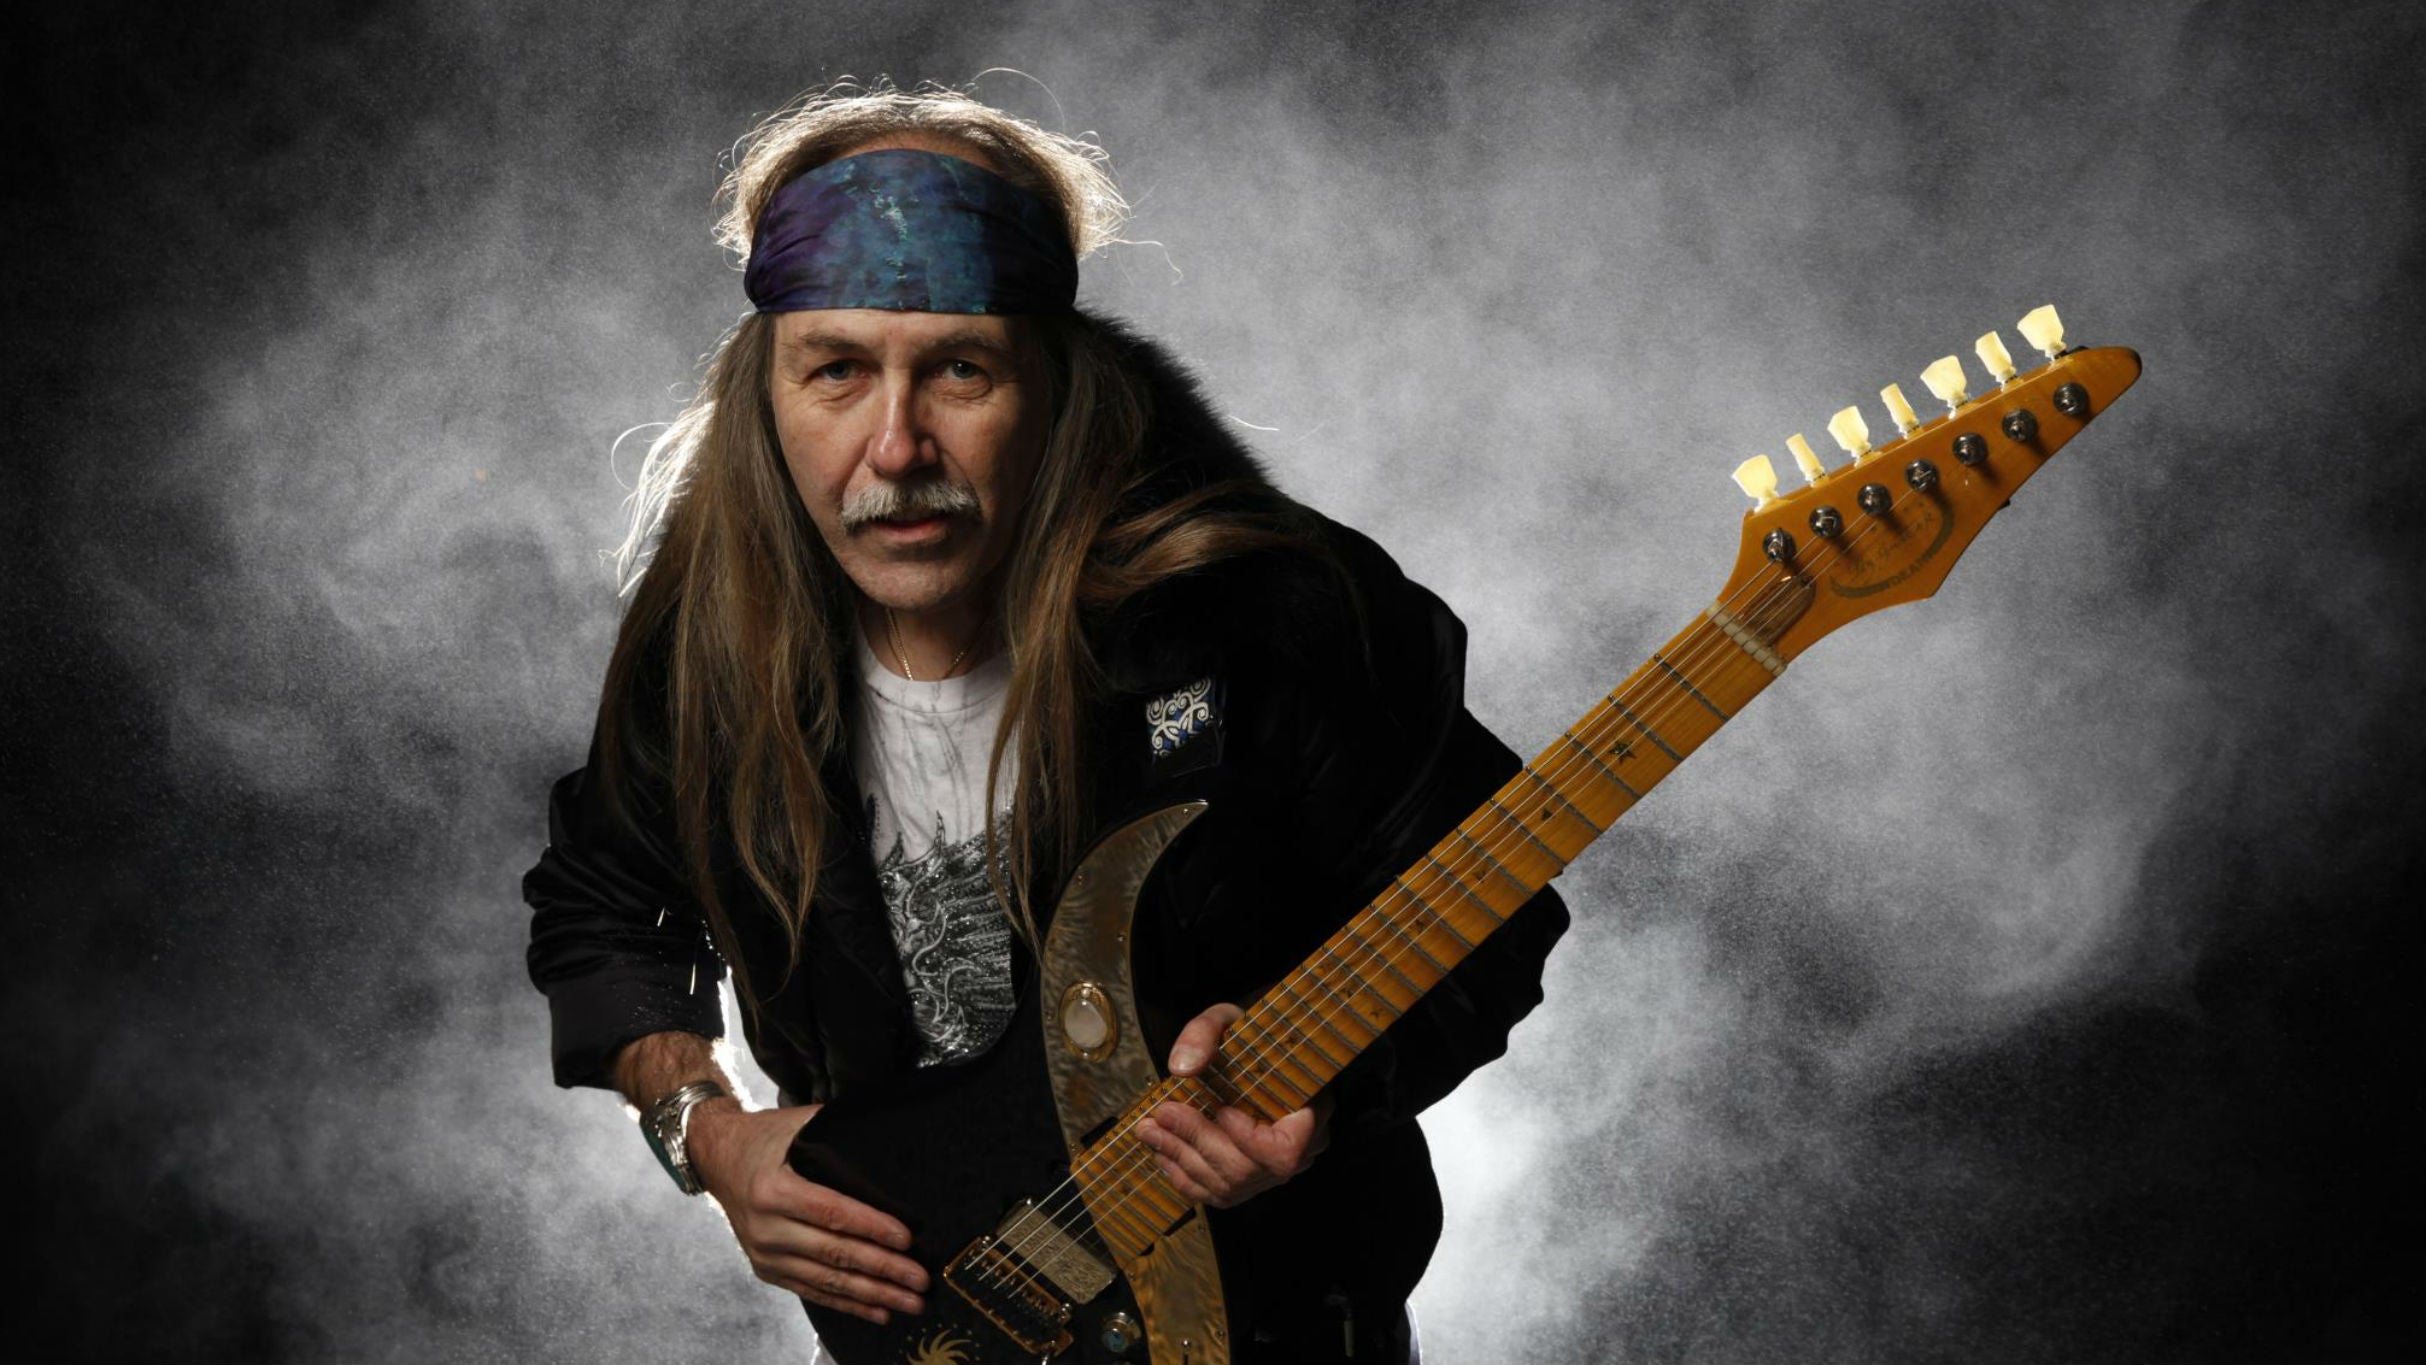 An Evening with Uli Jon Roth at Tractor